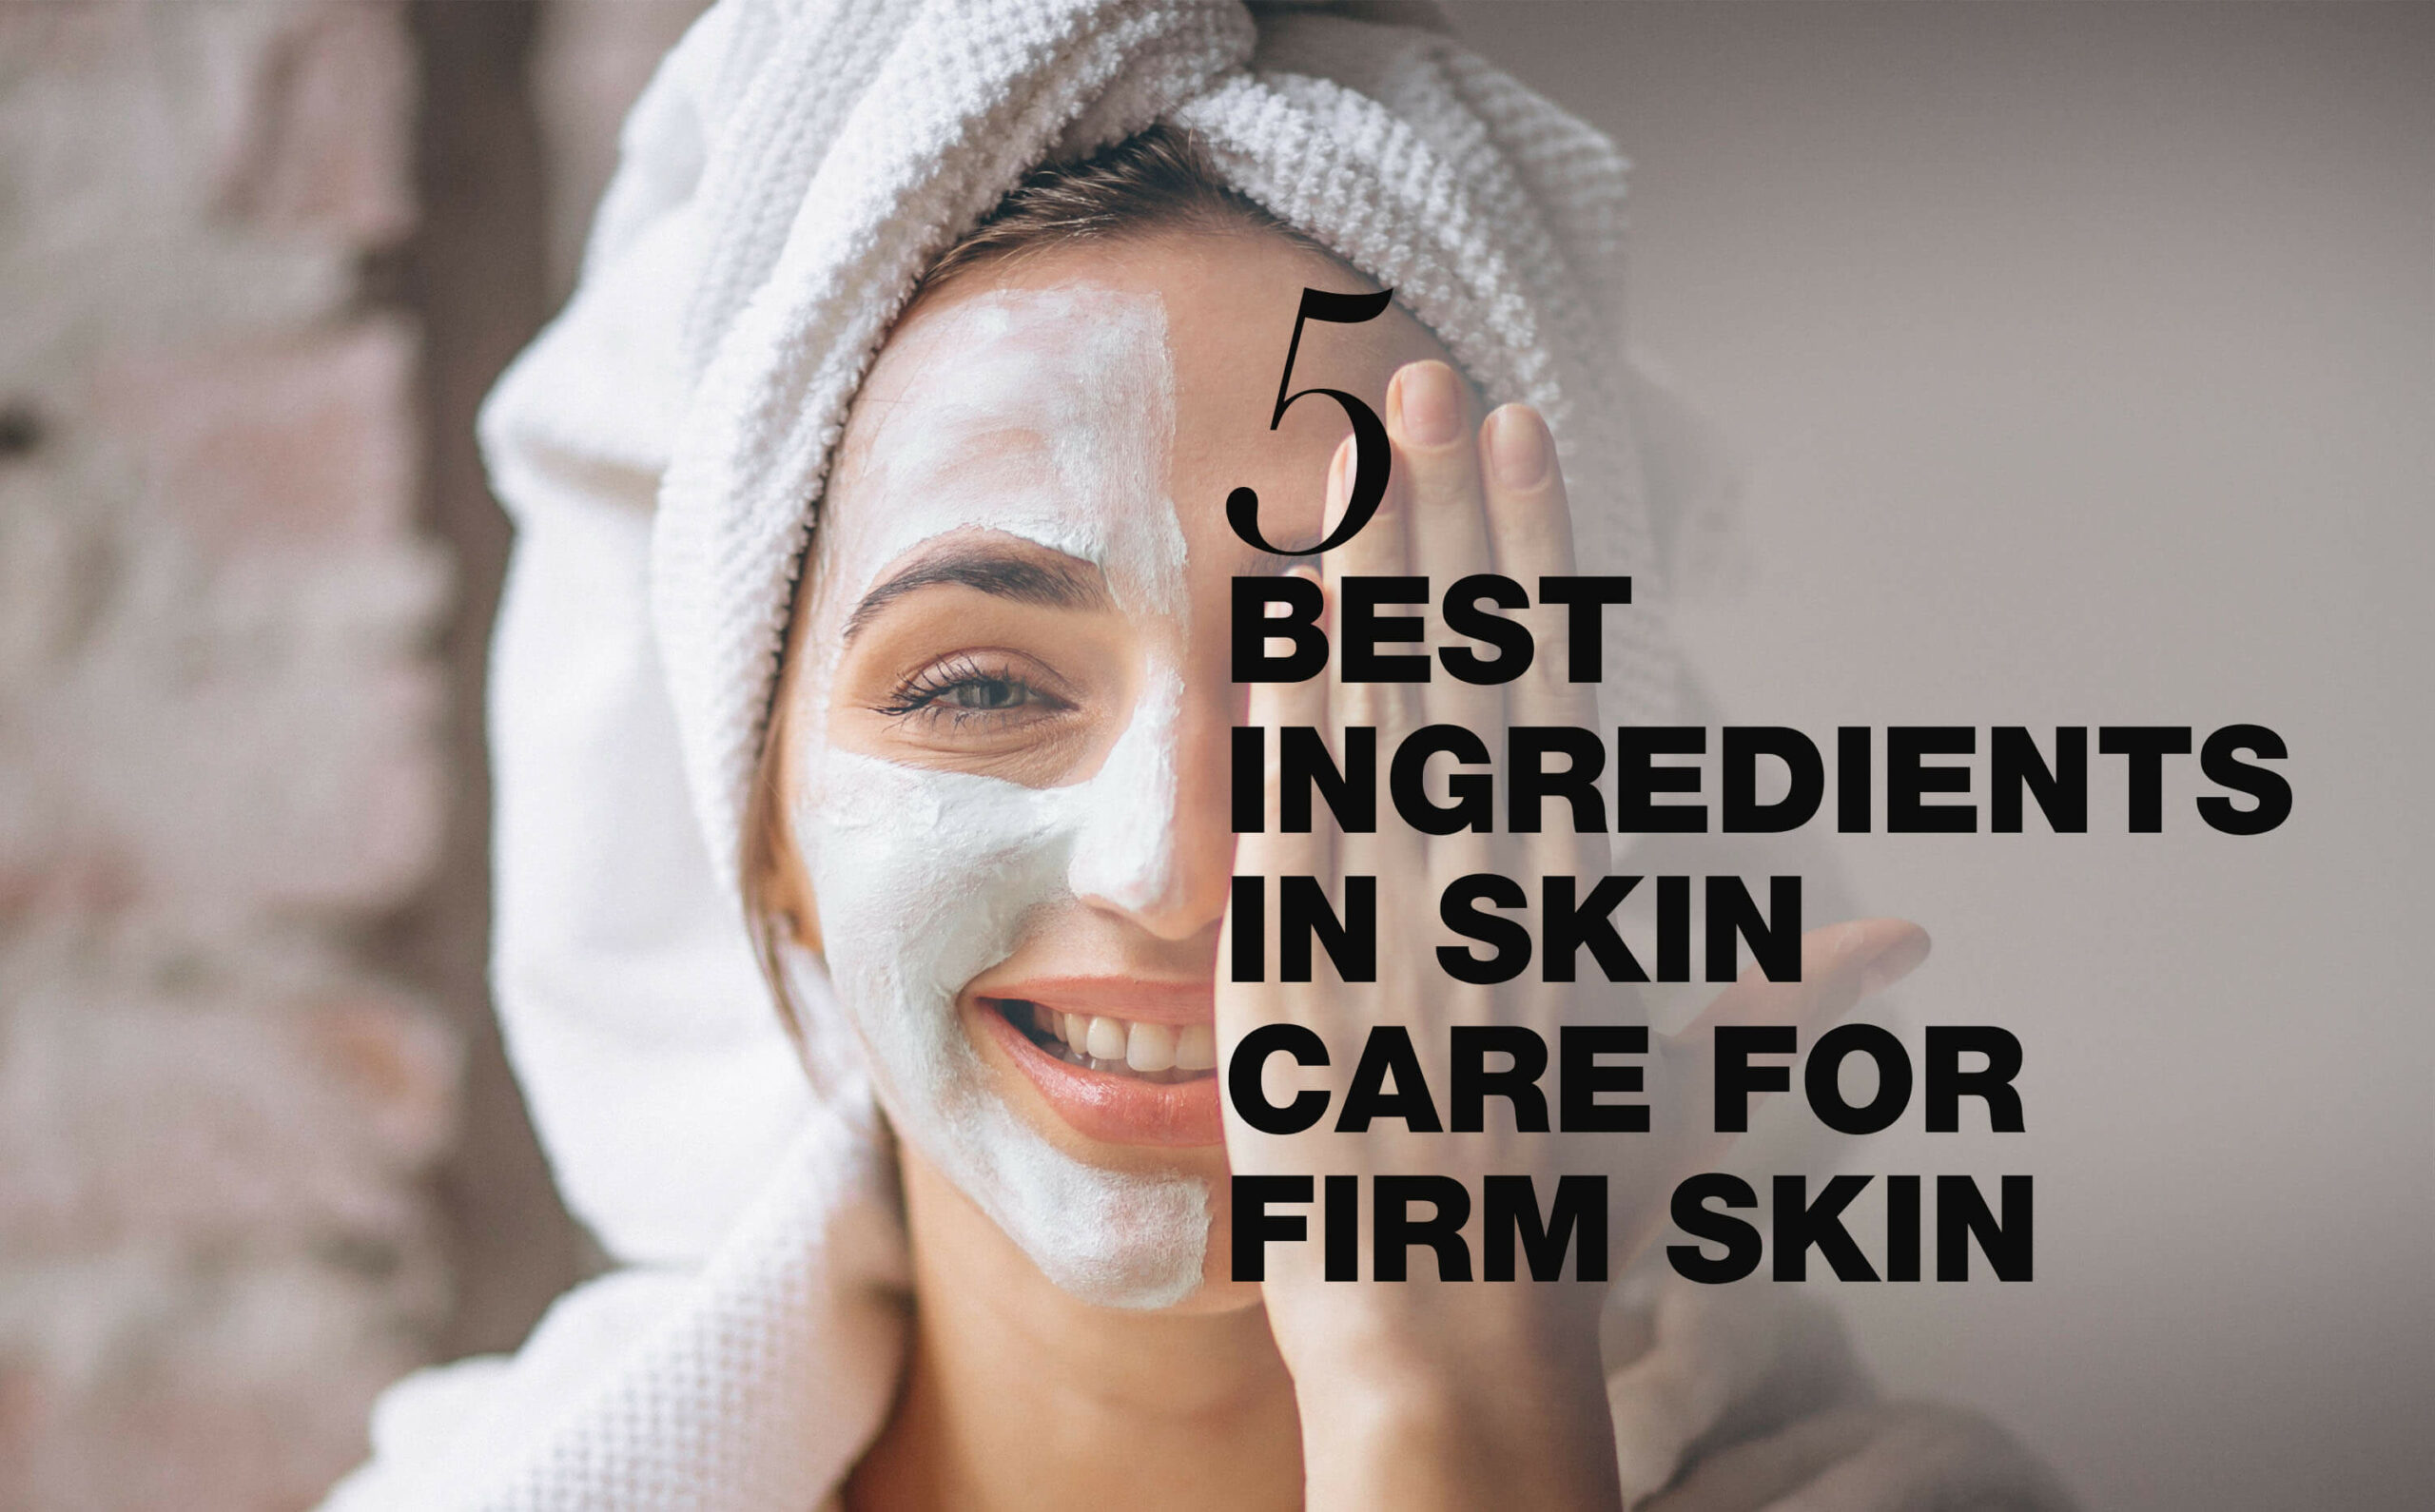 A woman putting on half of face mask while covering the half with her hand. The text '5 best ingredients in skincare for firm skin' is displayed.